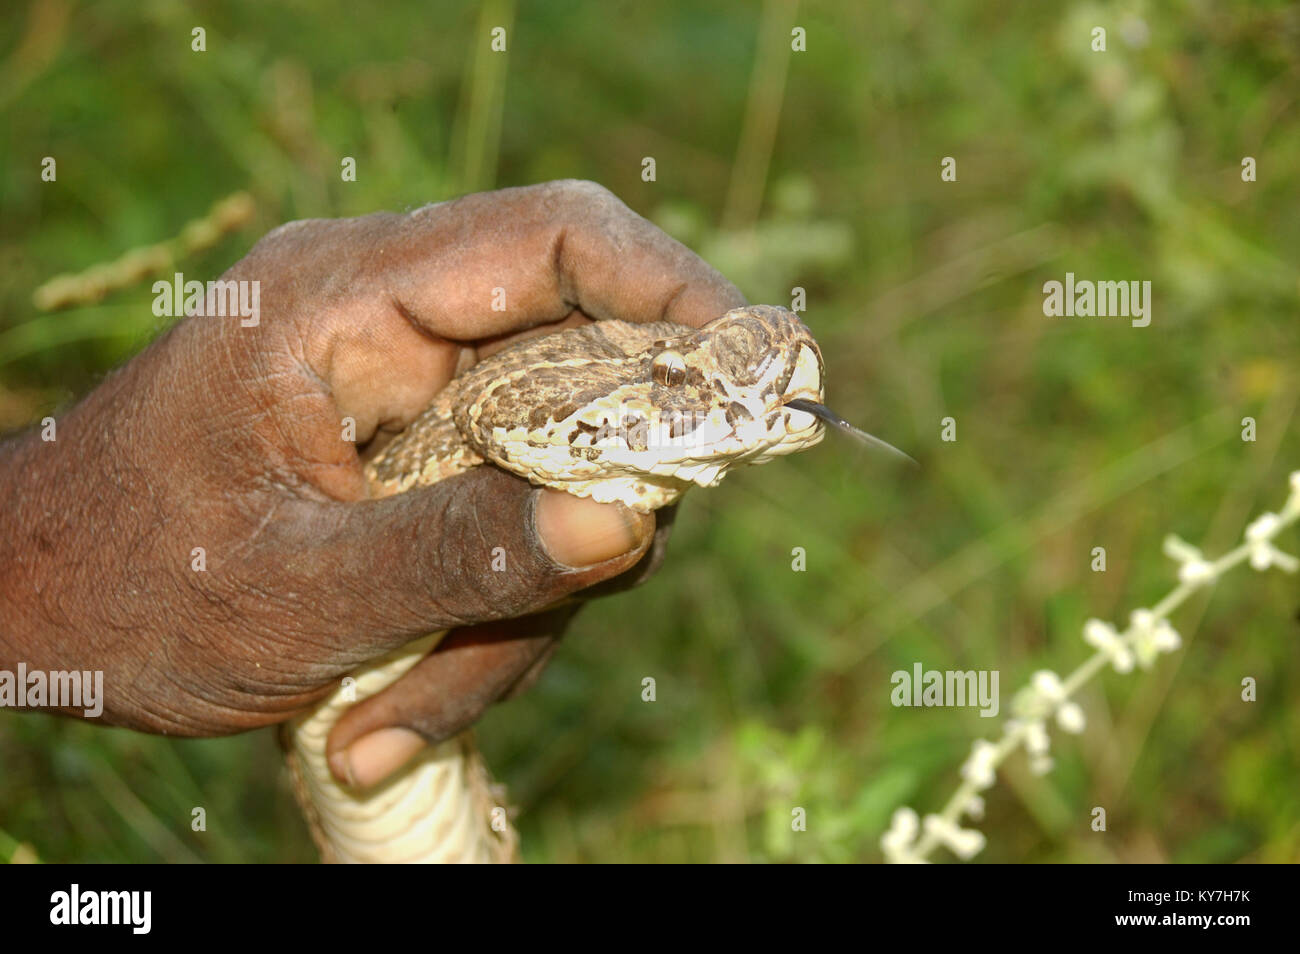 hand holding adult Russell's Viper, Daboia russelii, Tamil Nadu, South India Stock Photo